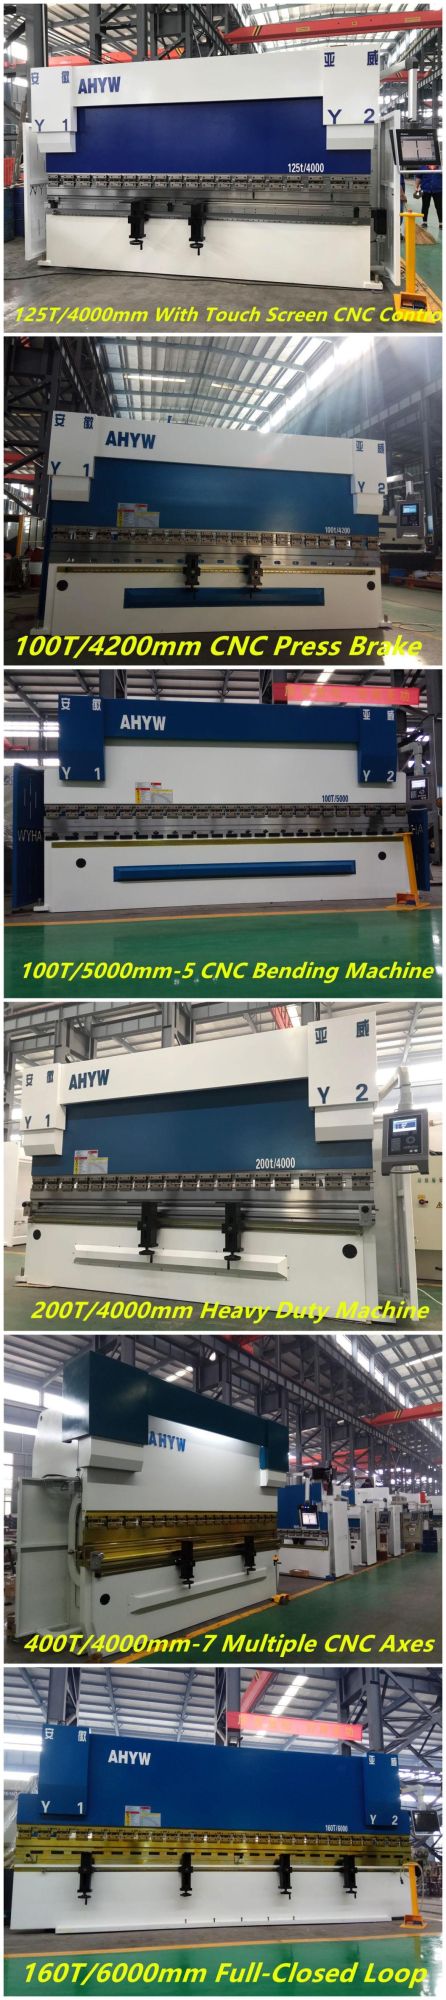 Us Industrial Press Brake From Anhui Yawei with Ahyw Logo for Metal Sheet Bending